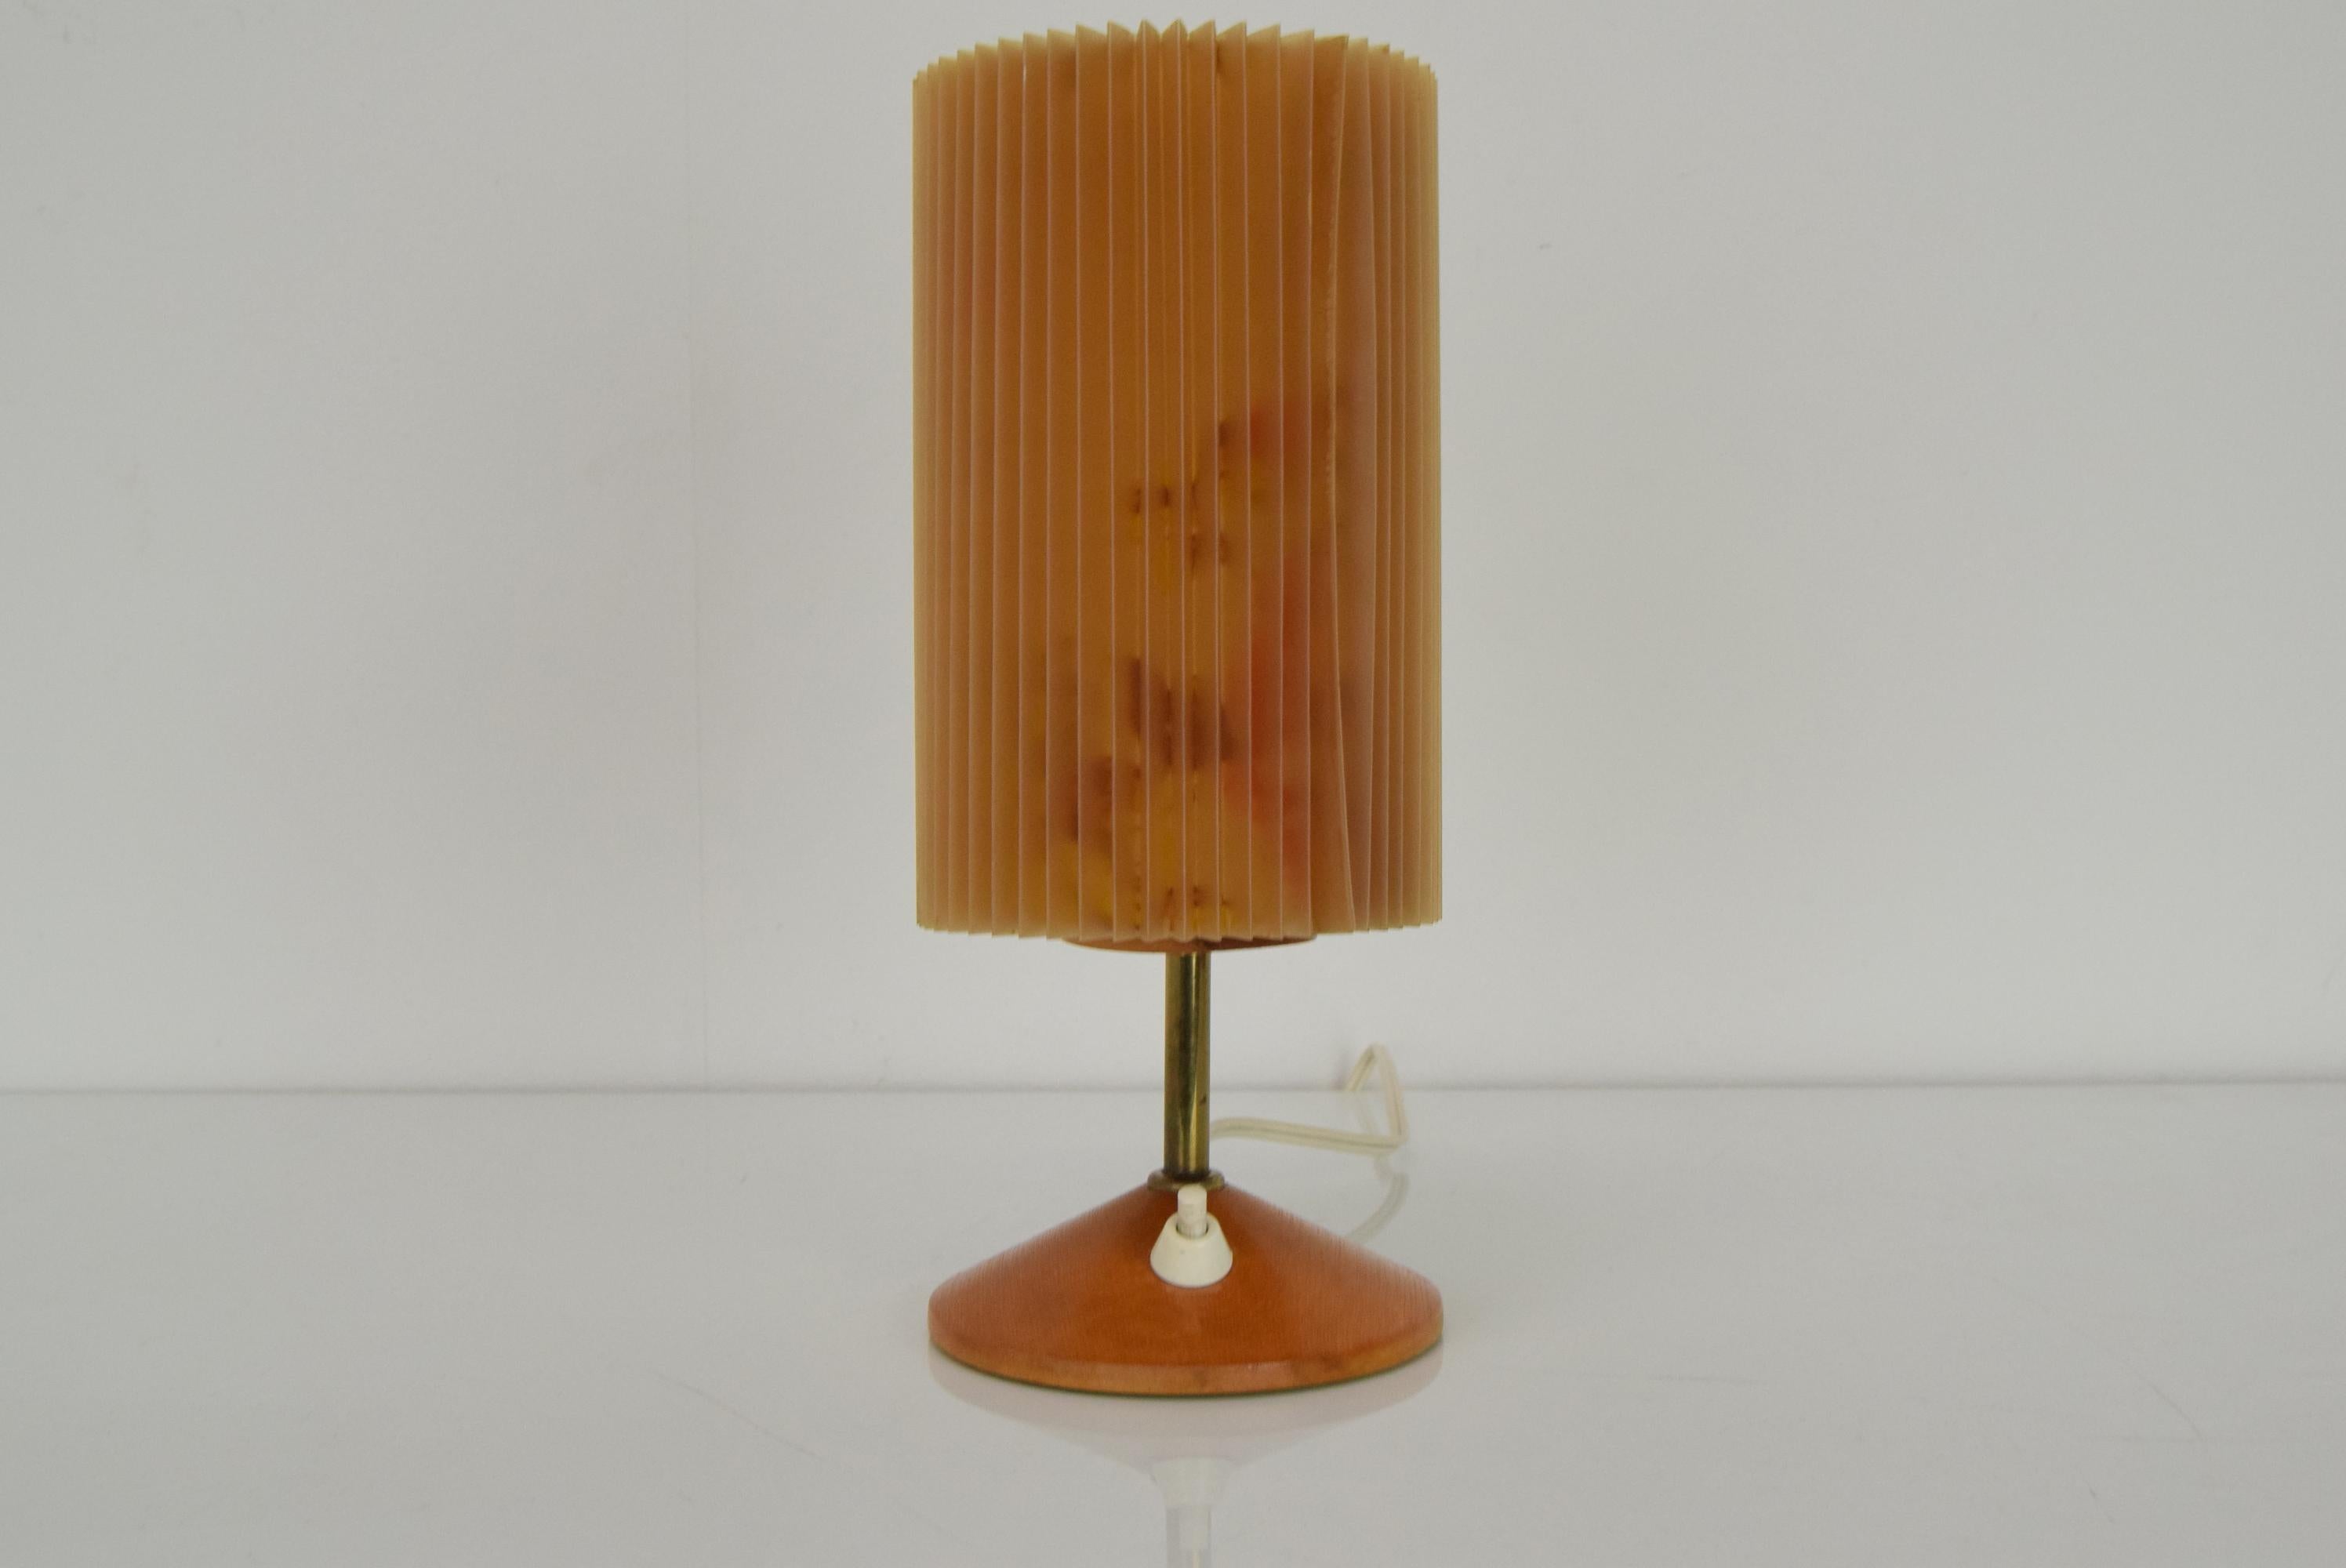 Made in Czechoslovakia
Made of Wood,Plastic,Brass
1xE27 or E26 bulb
Minor defect(See foto)
With aged patina
US adapter included
Original condition.